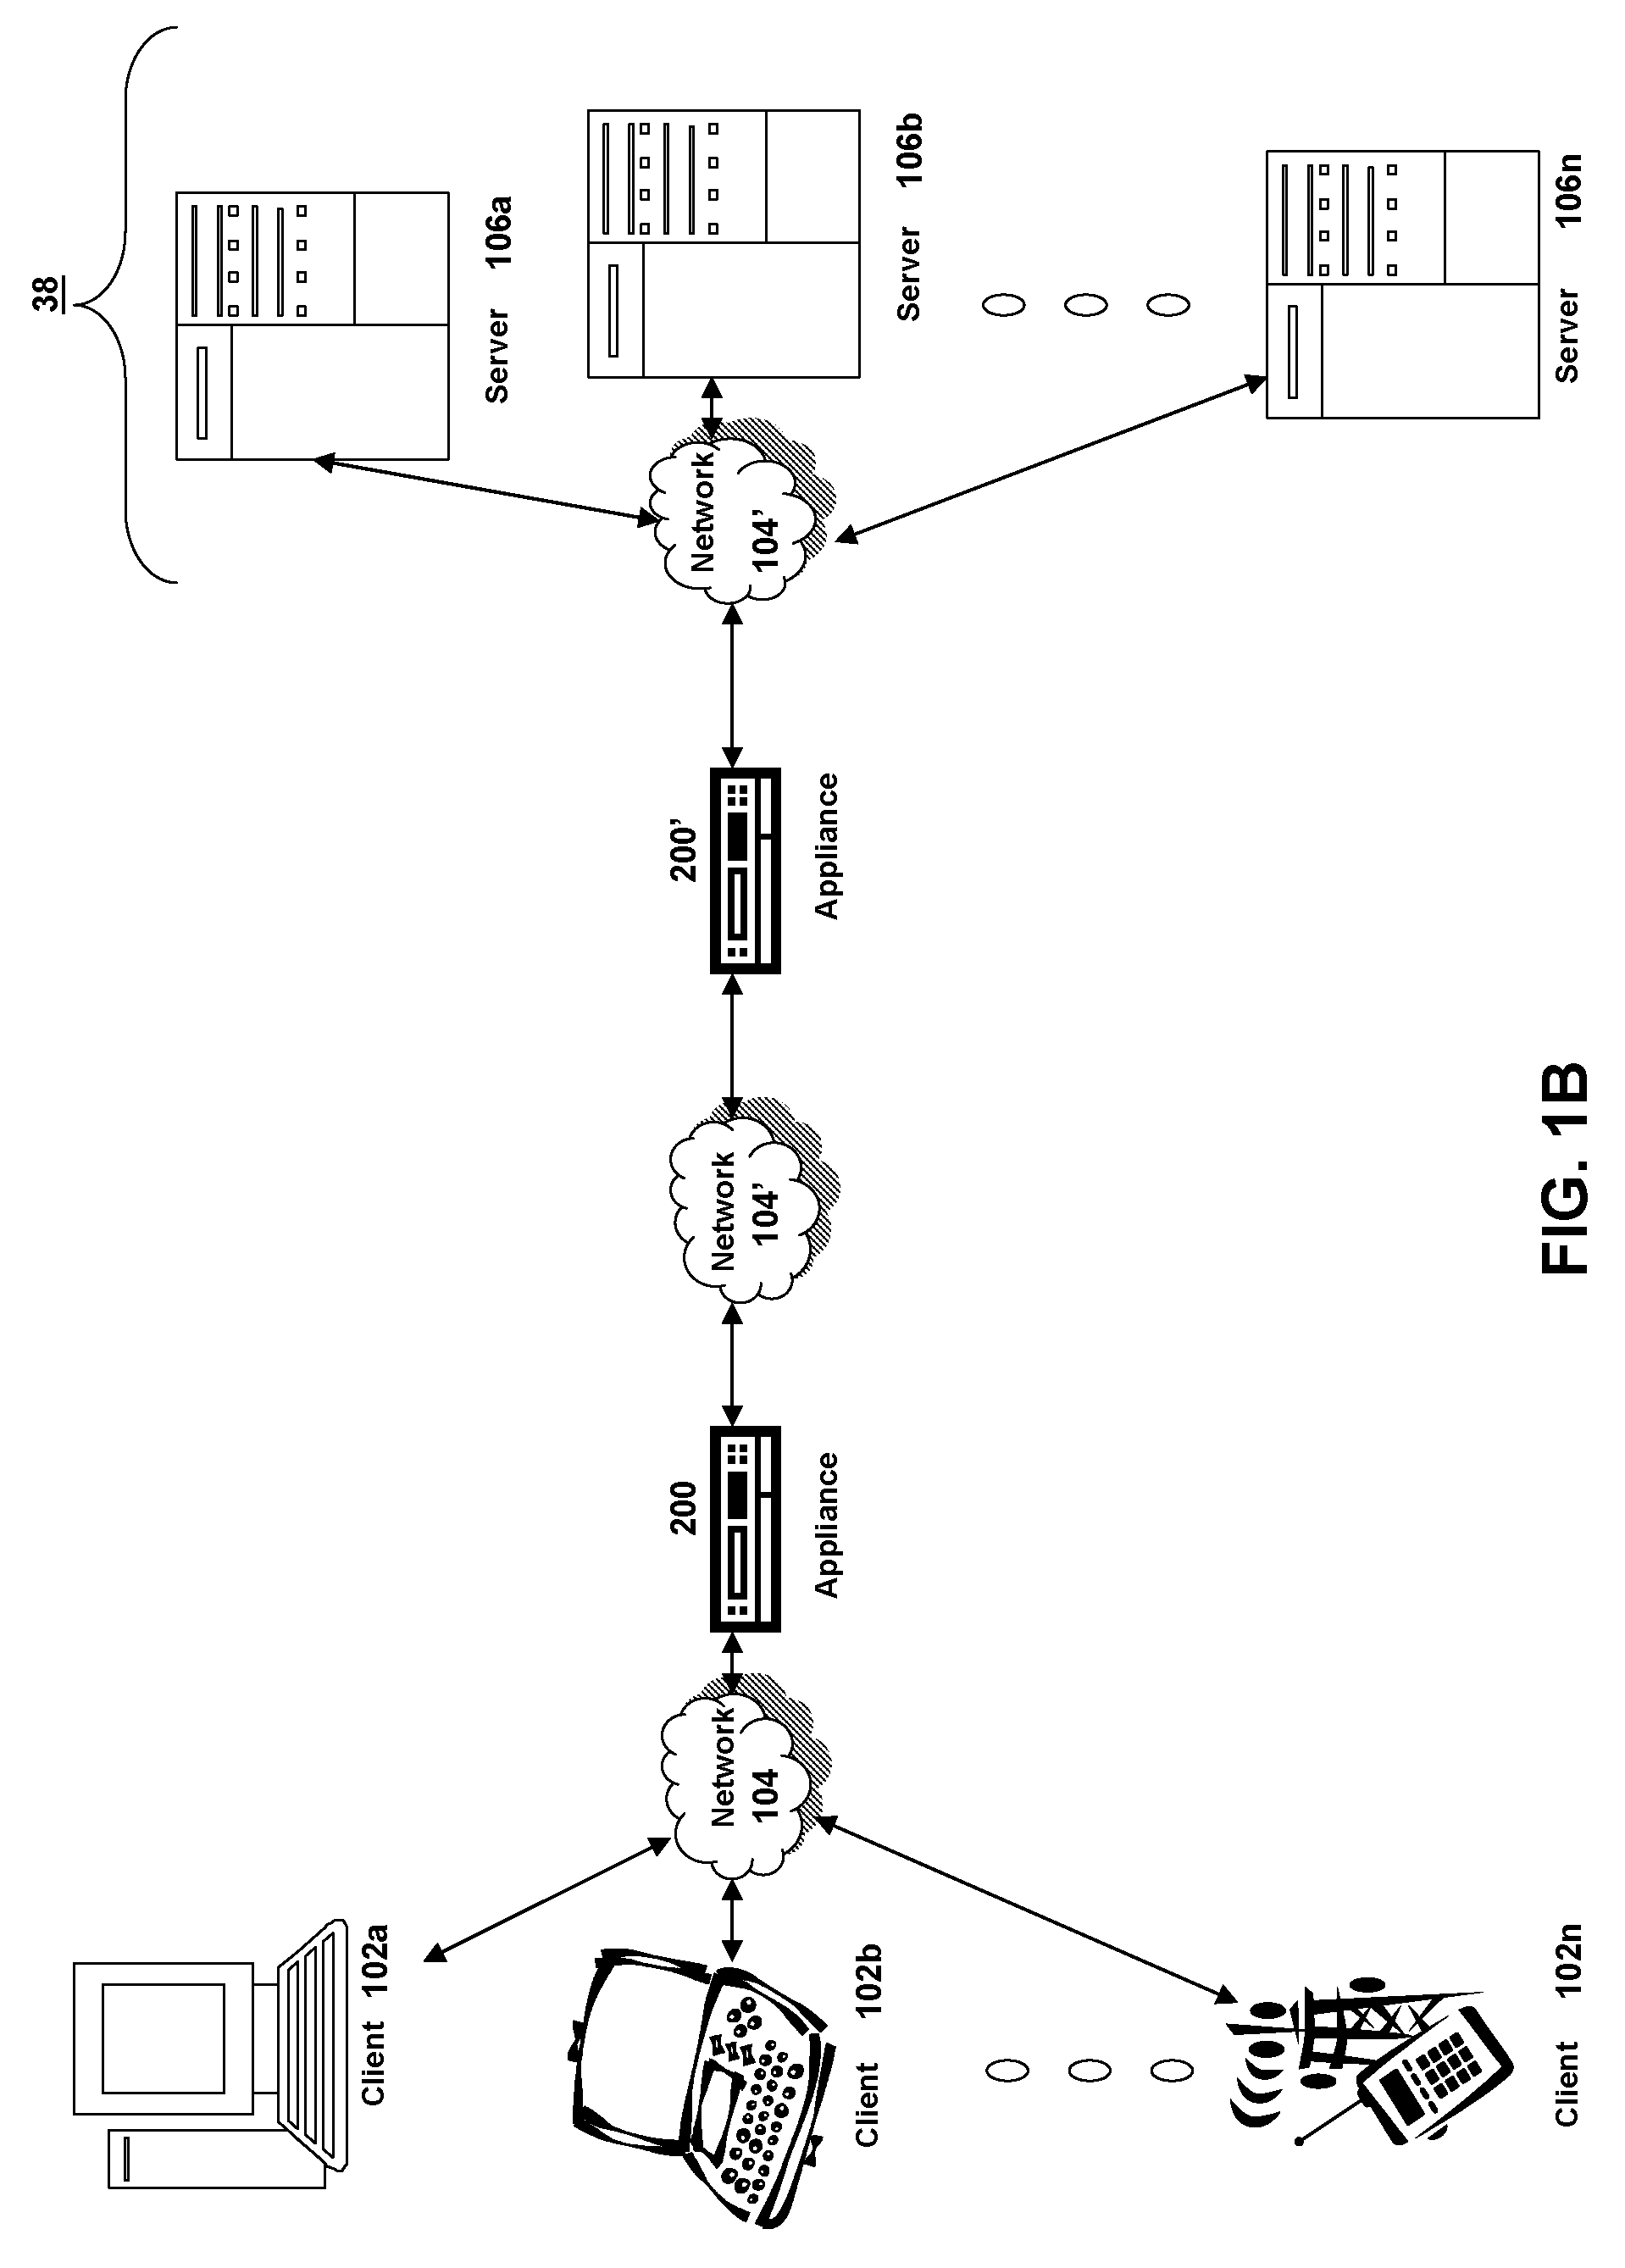 Systems and methods for batchable hierarchical configuration